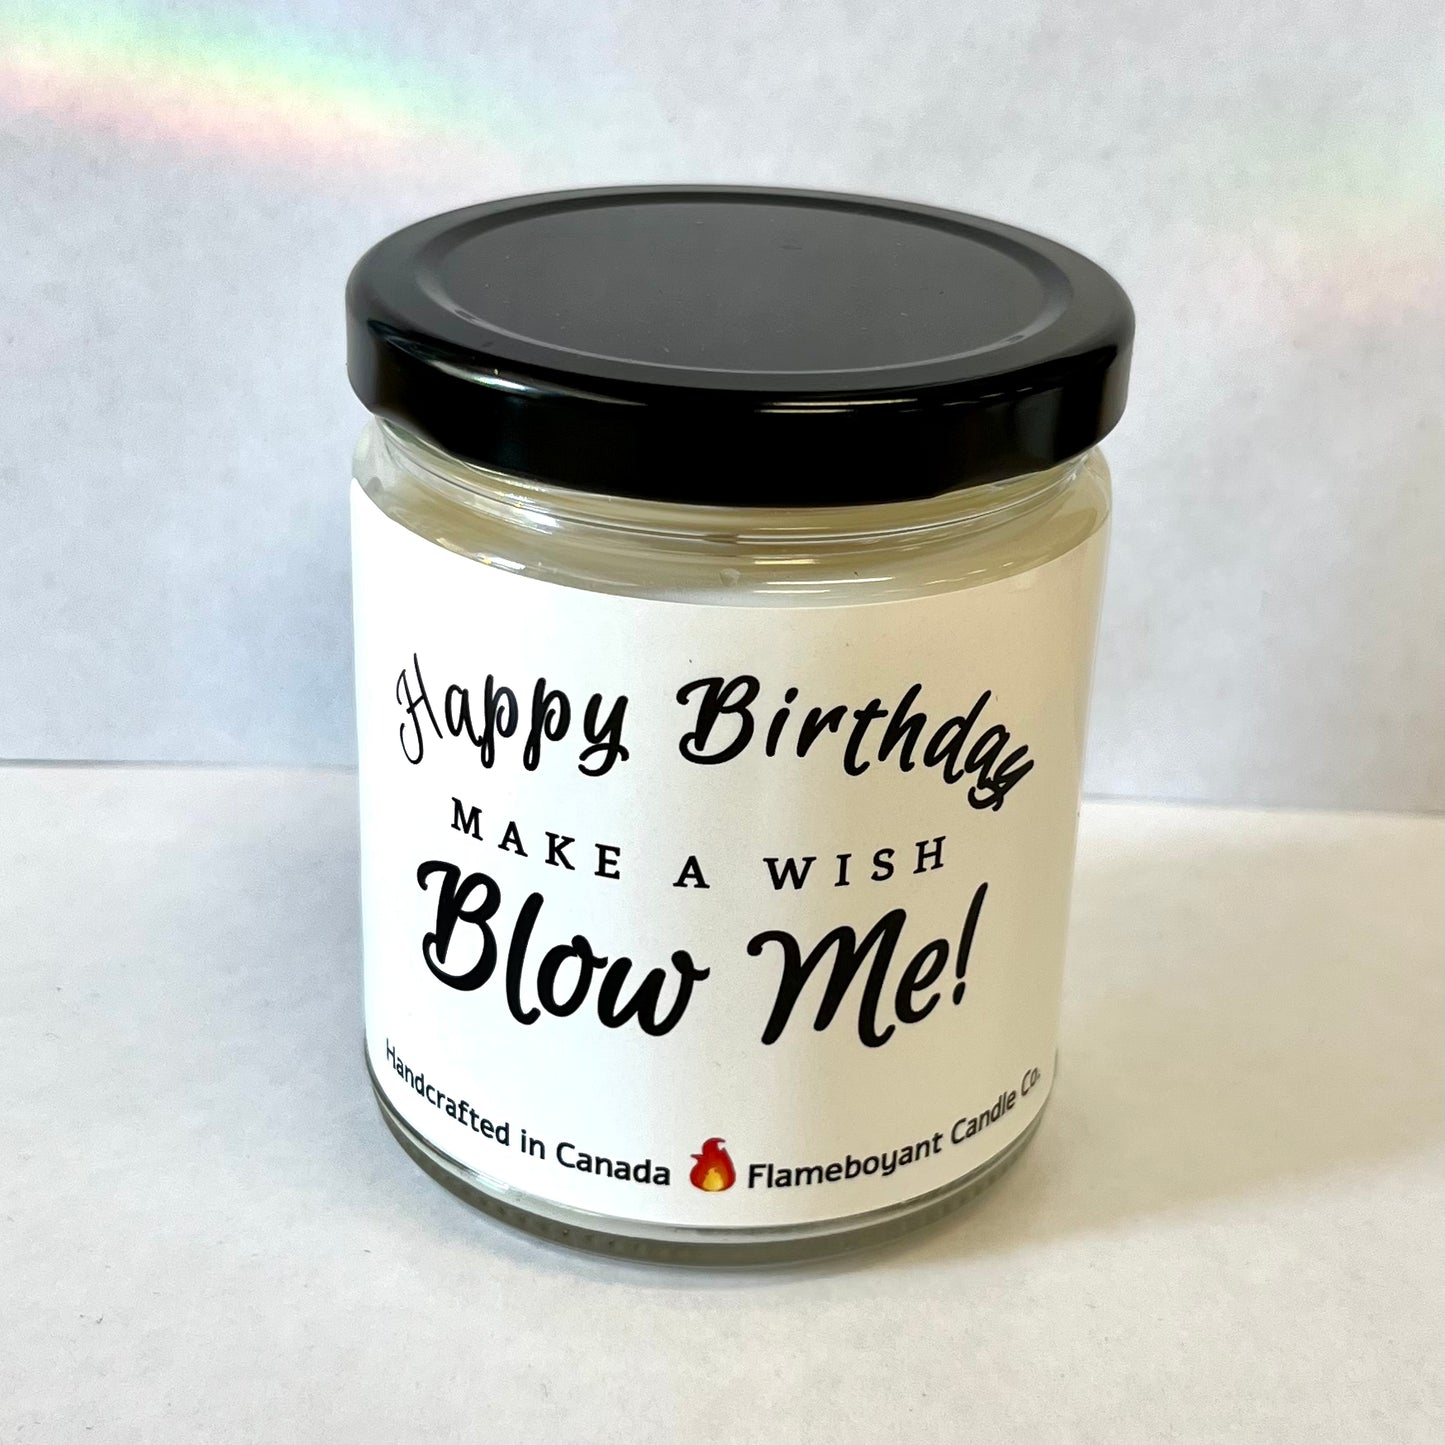 Flameboyant Candles - Sassy Funny Candles